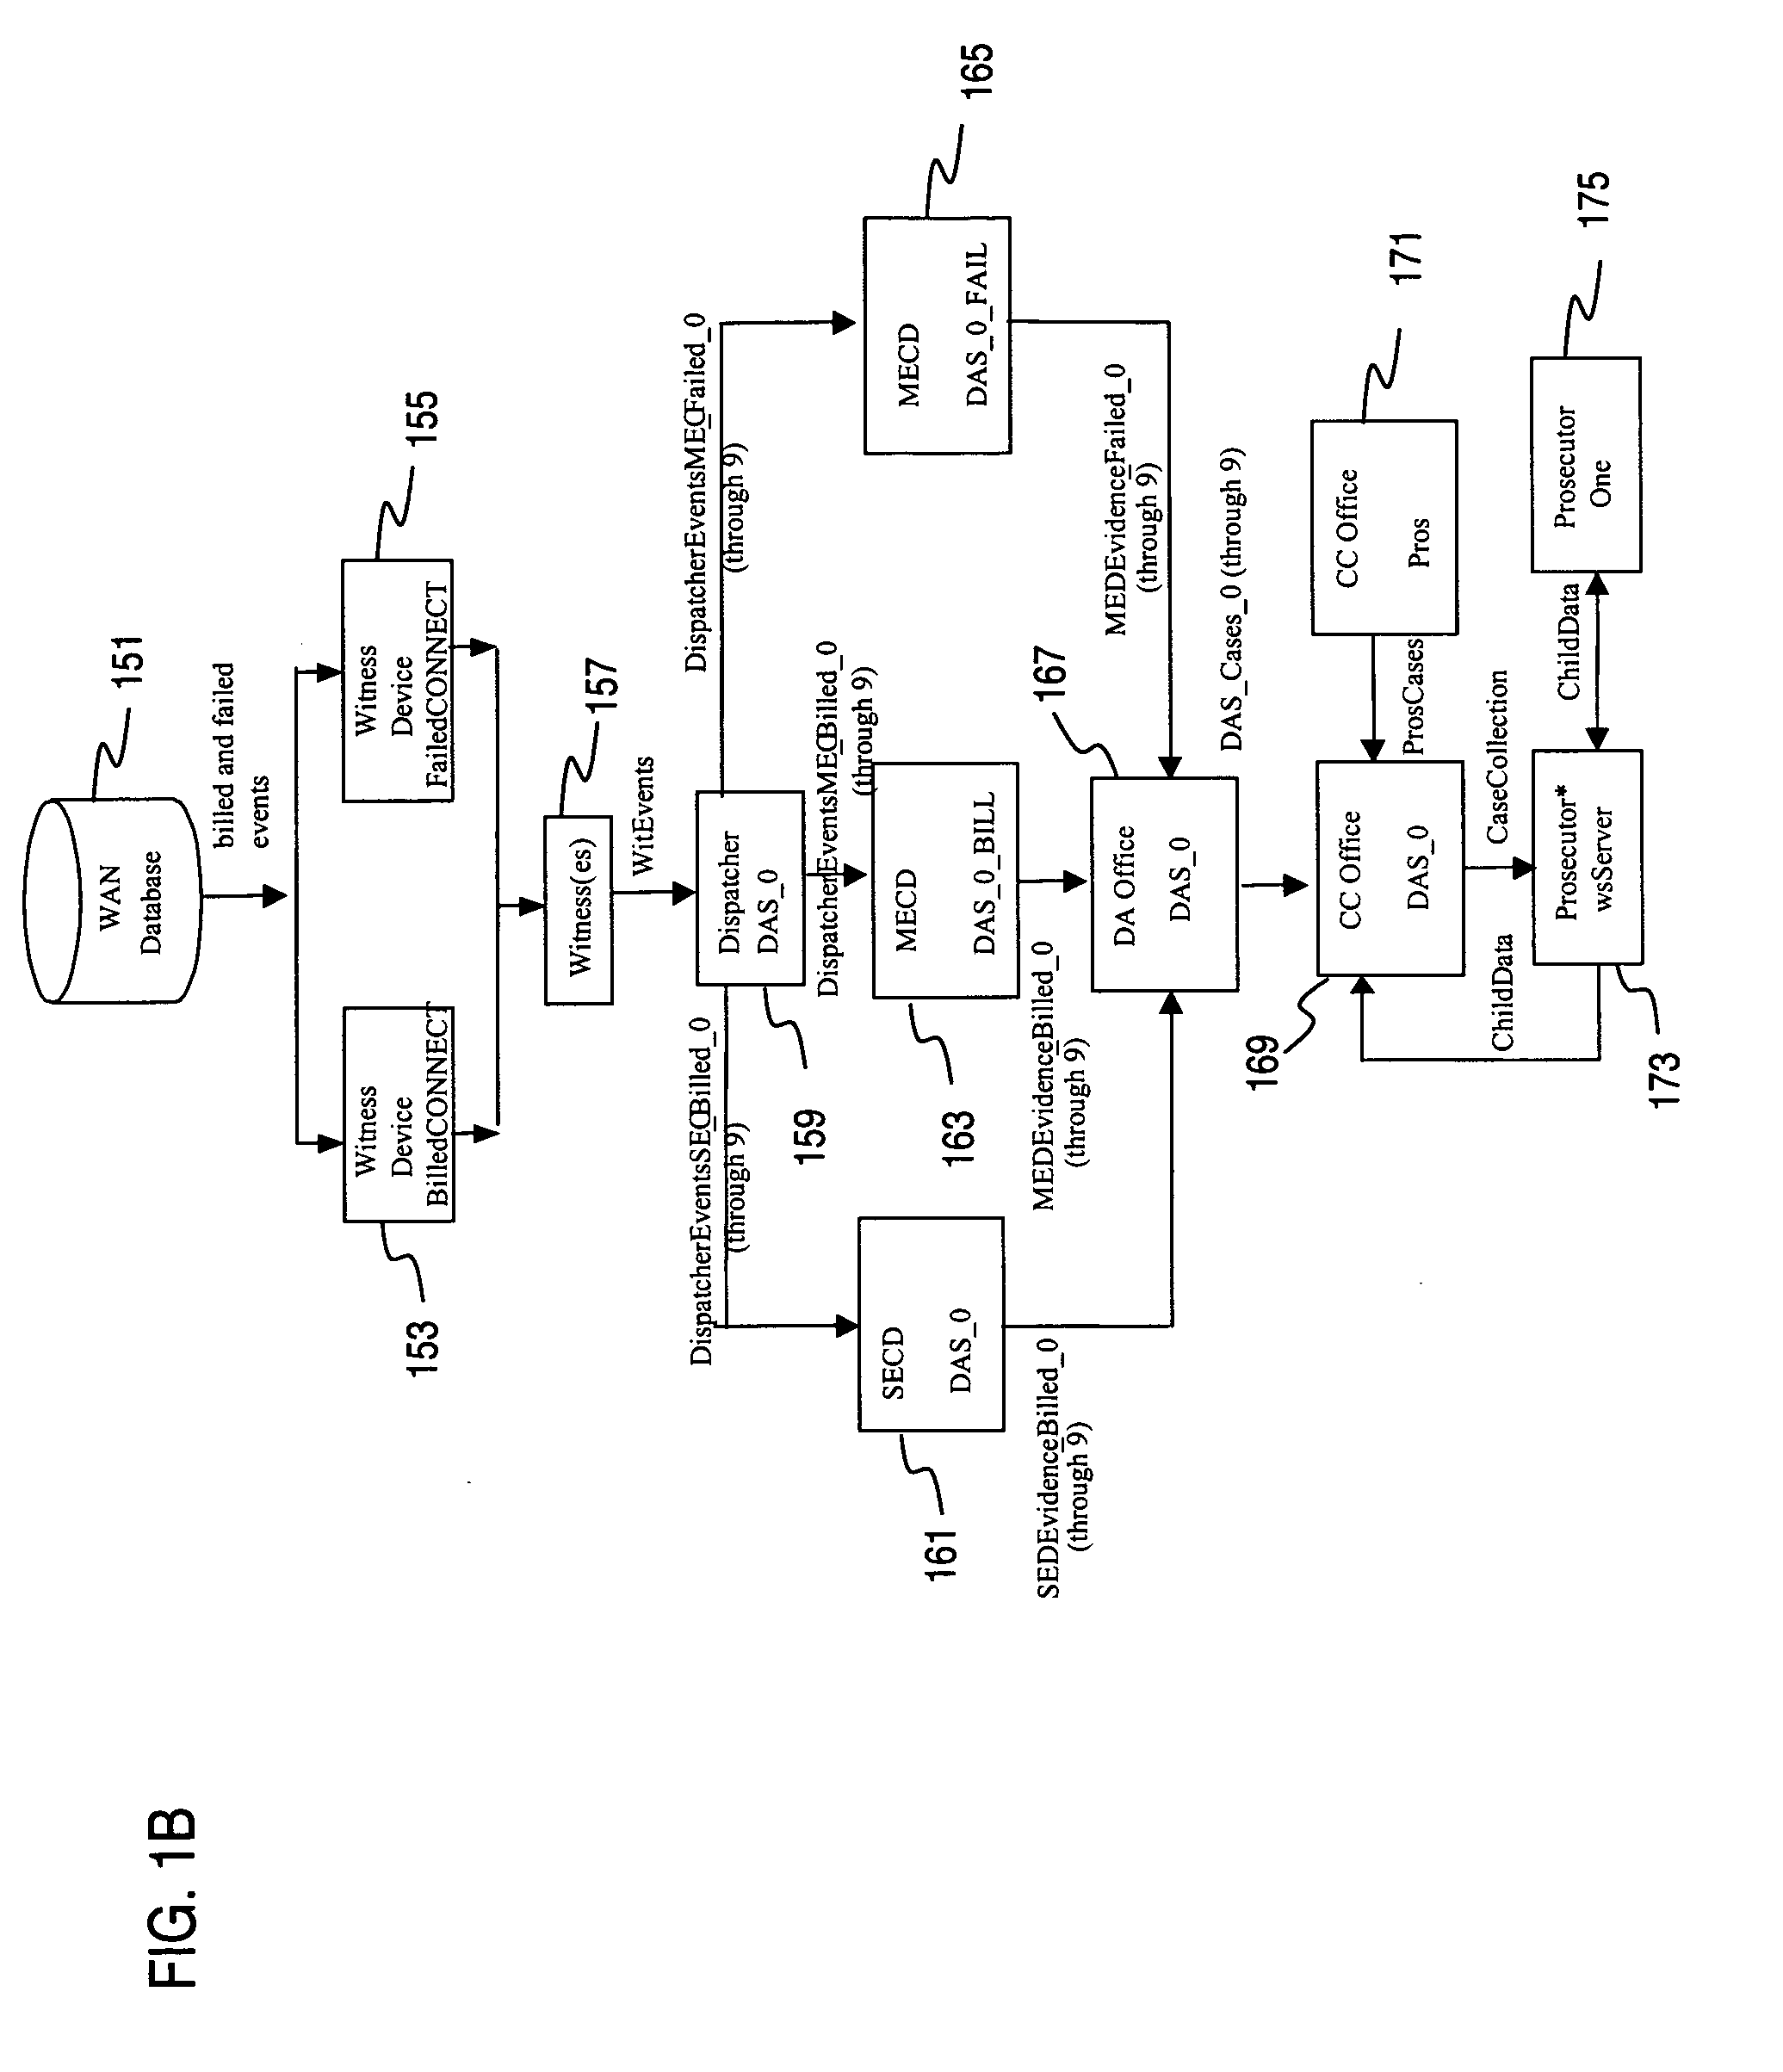 Method and system for providing fraud detection for remote access services